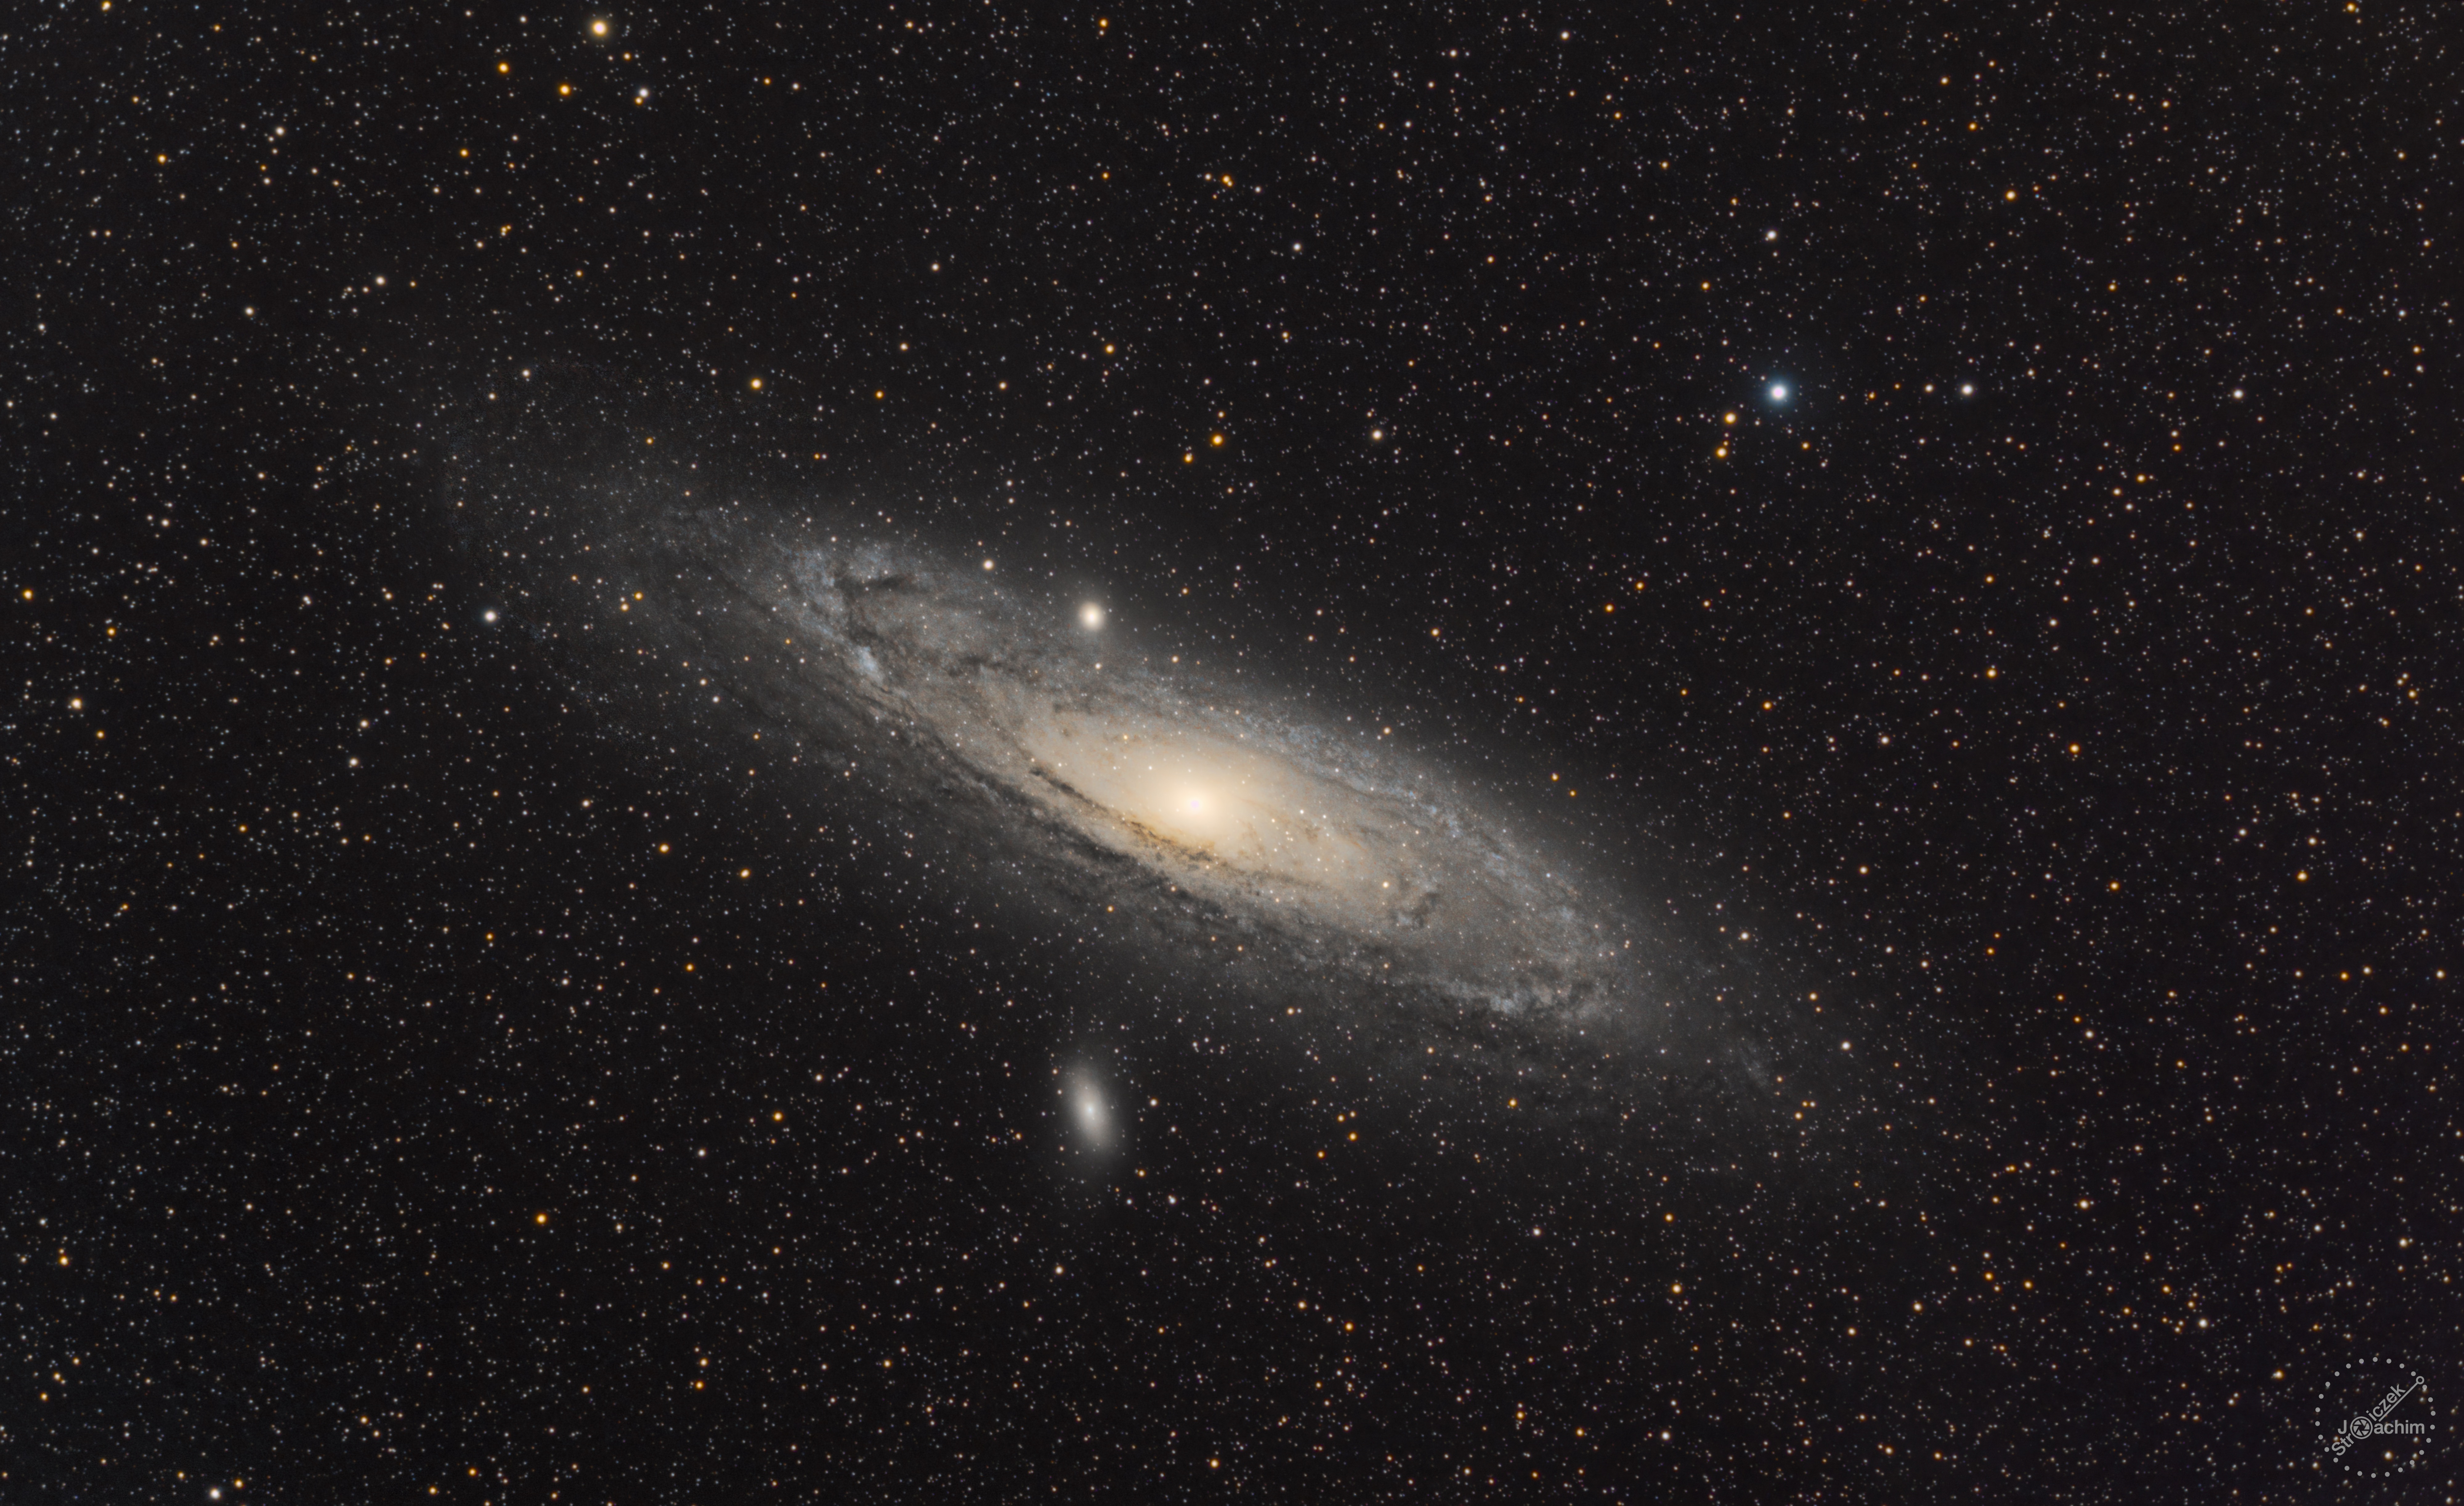 M 31 Andromeda Galaxie | 3.10.2022 | Canon 200d | Evoguide | 112x180s (5,6 Std.)